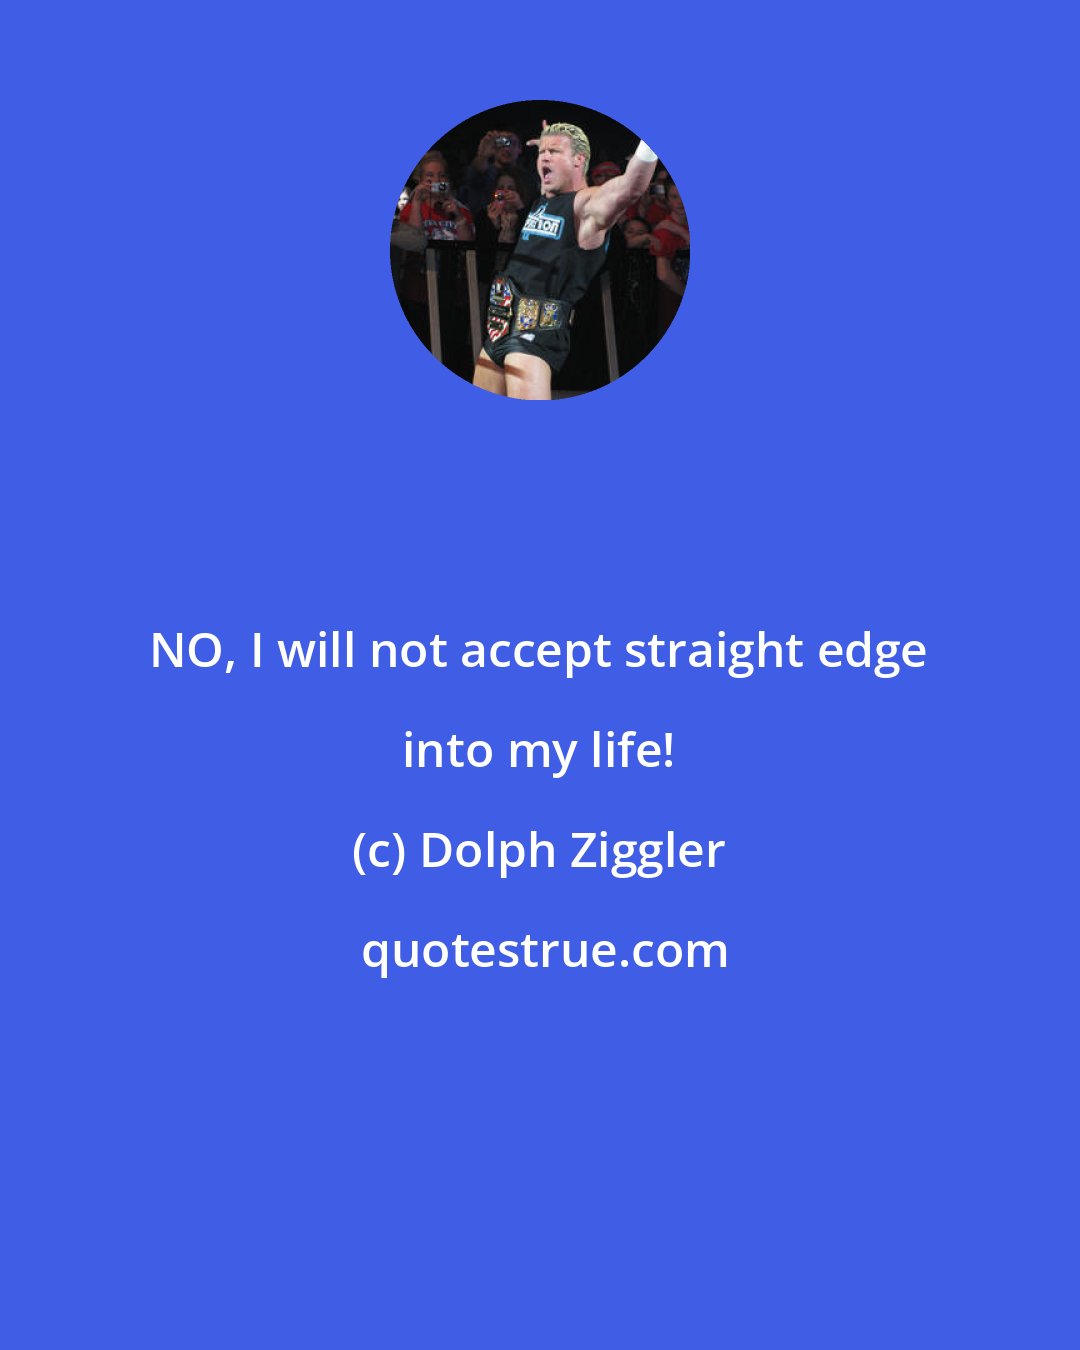 Dolph Ziggler: NO, I will not accept straight edge into my life!